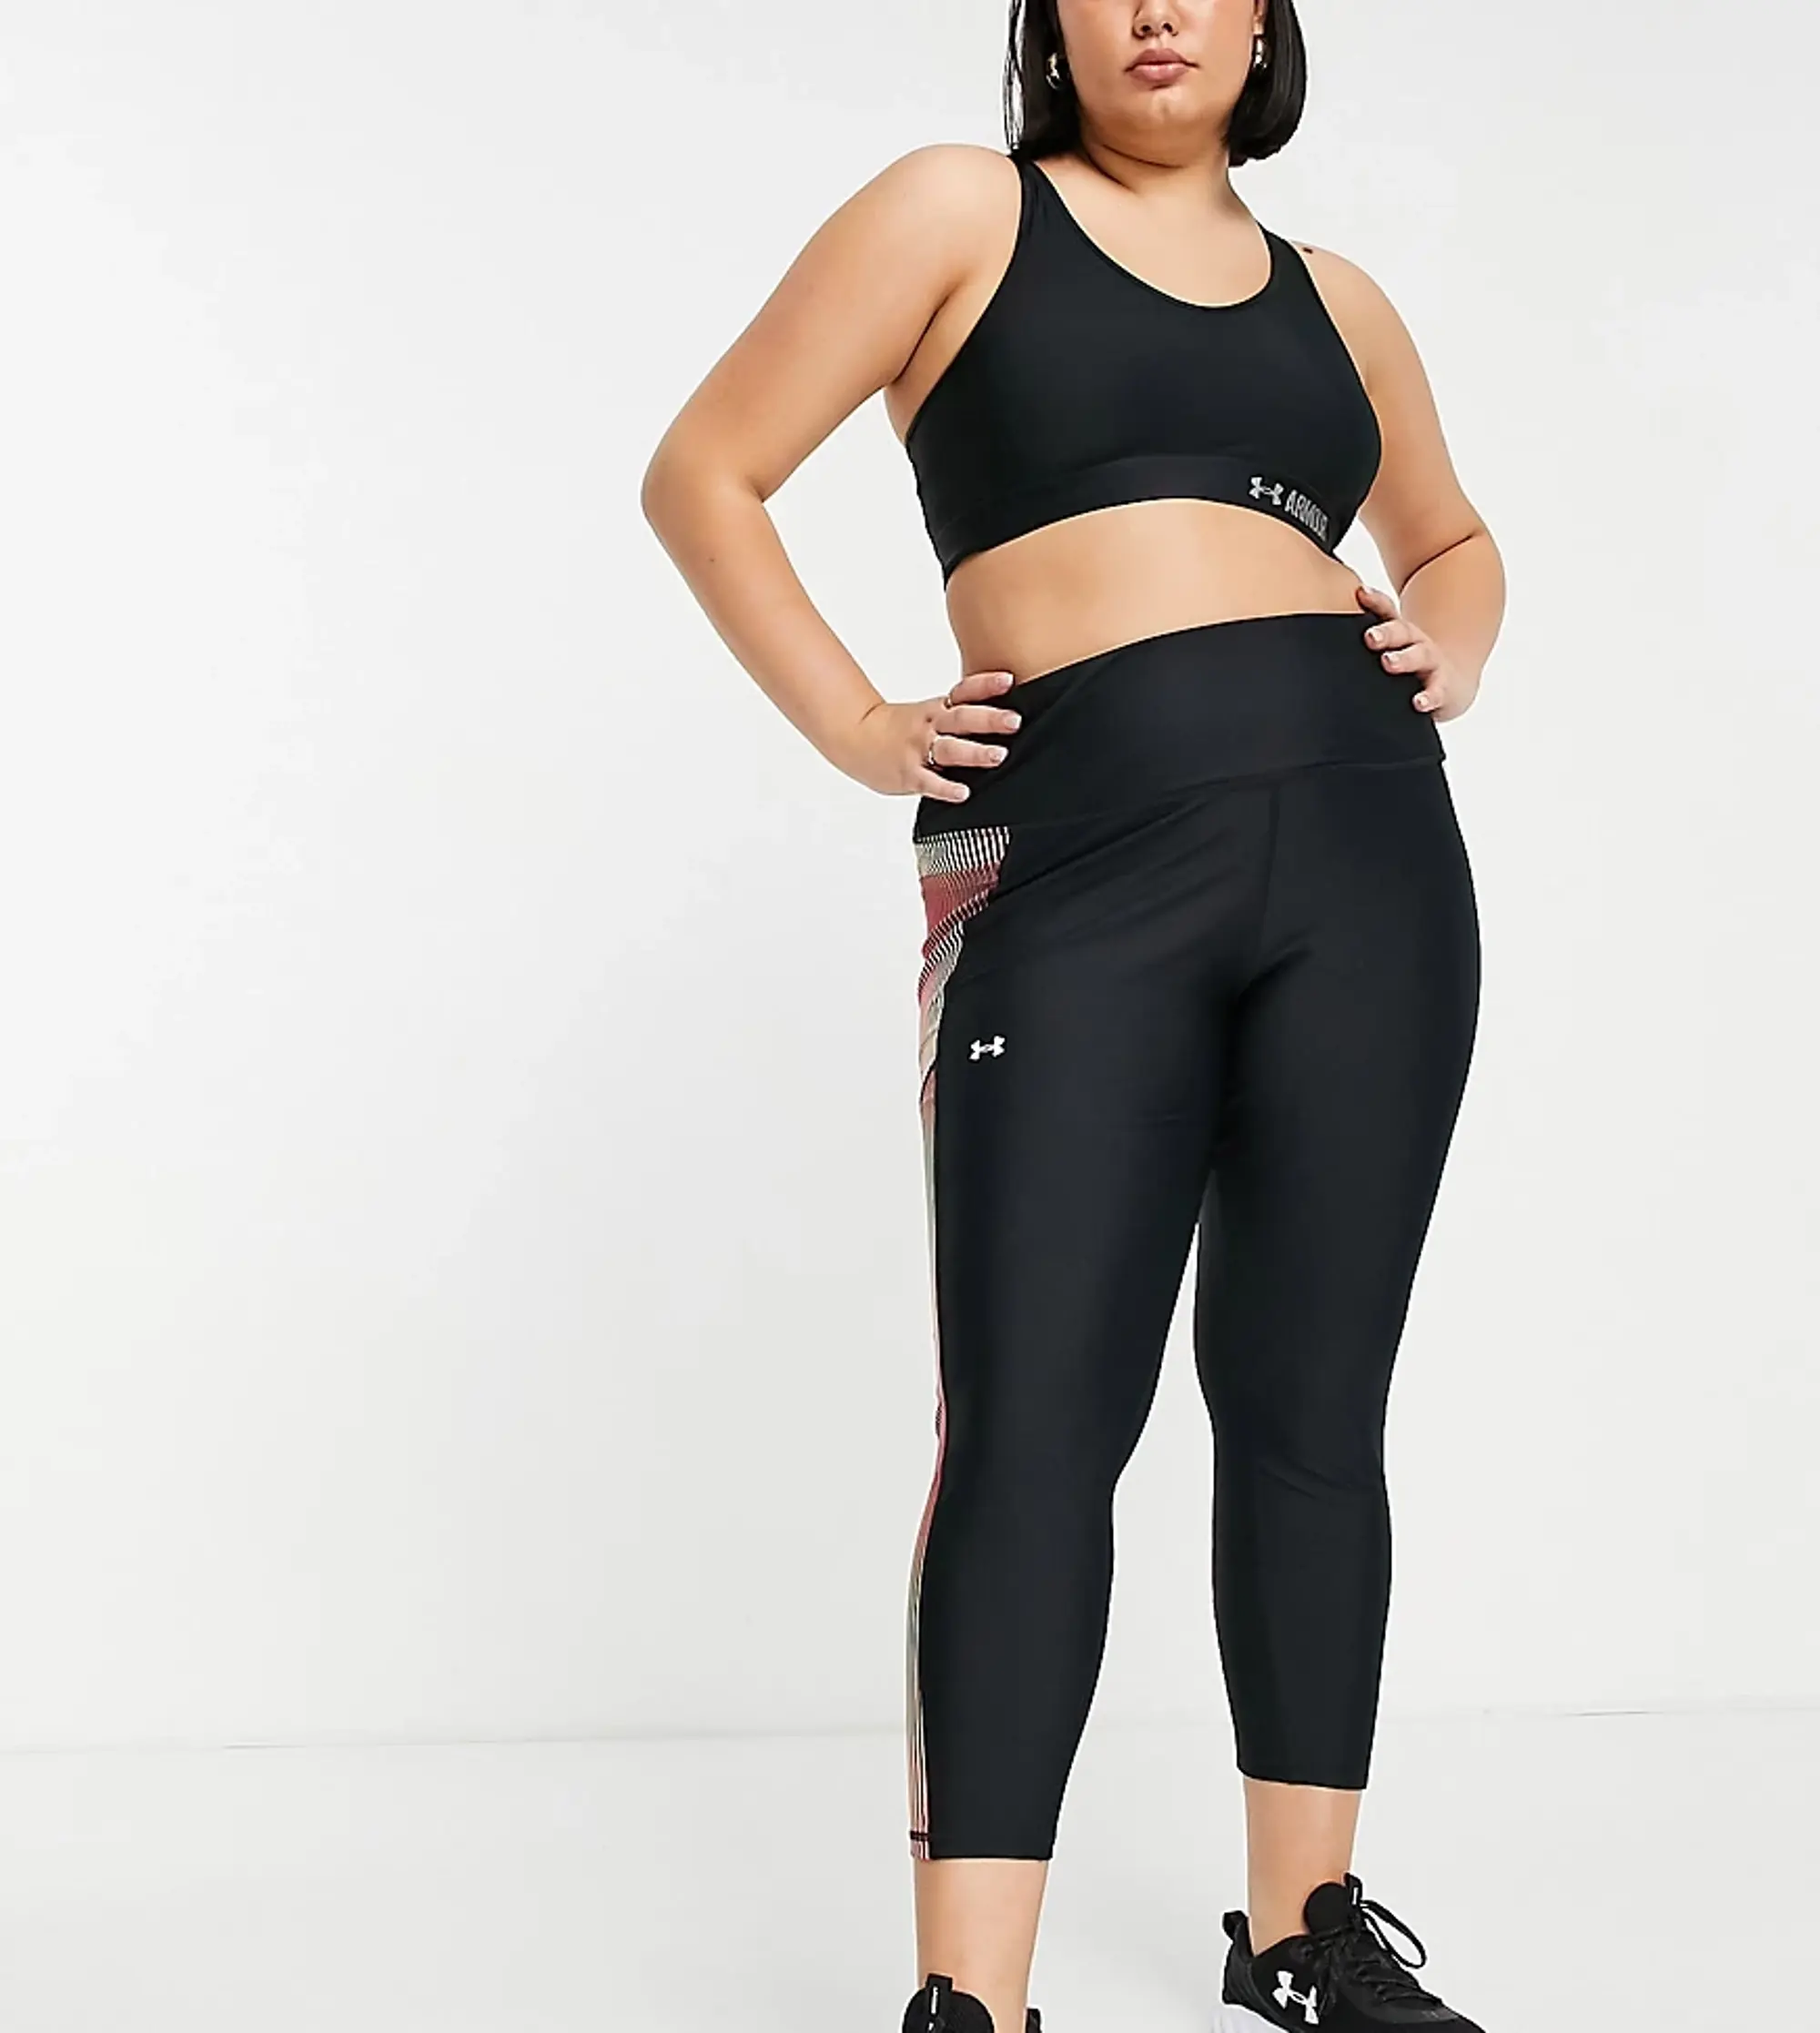 Under Armour Plus Heatgear Leggings With Side Panel In Black